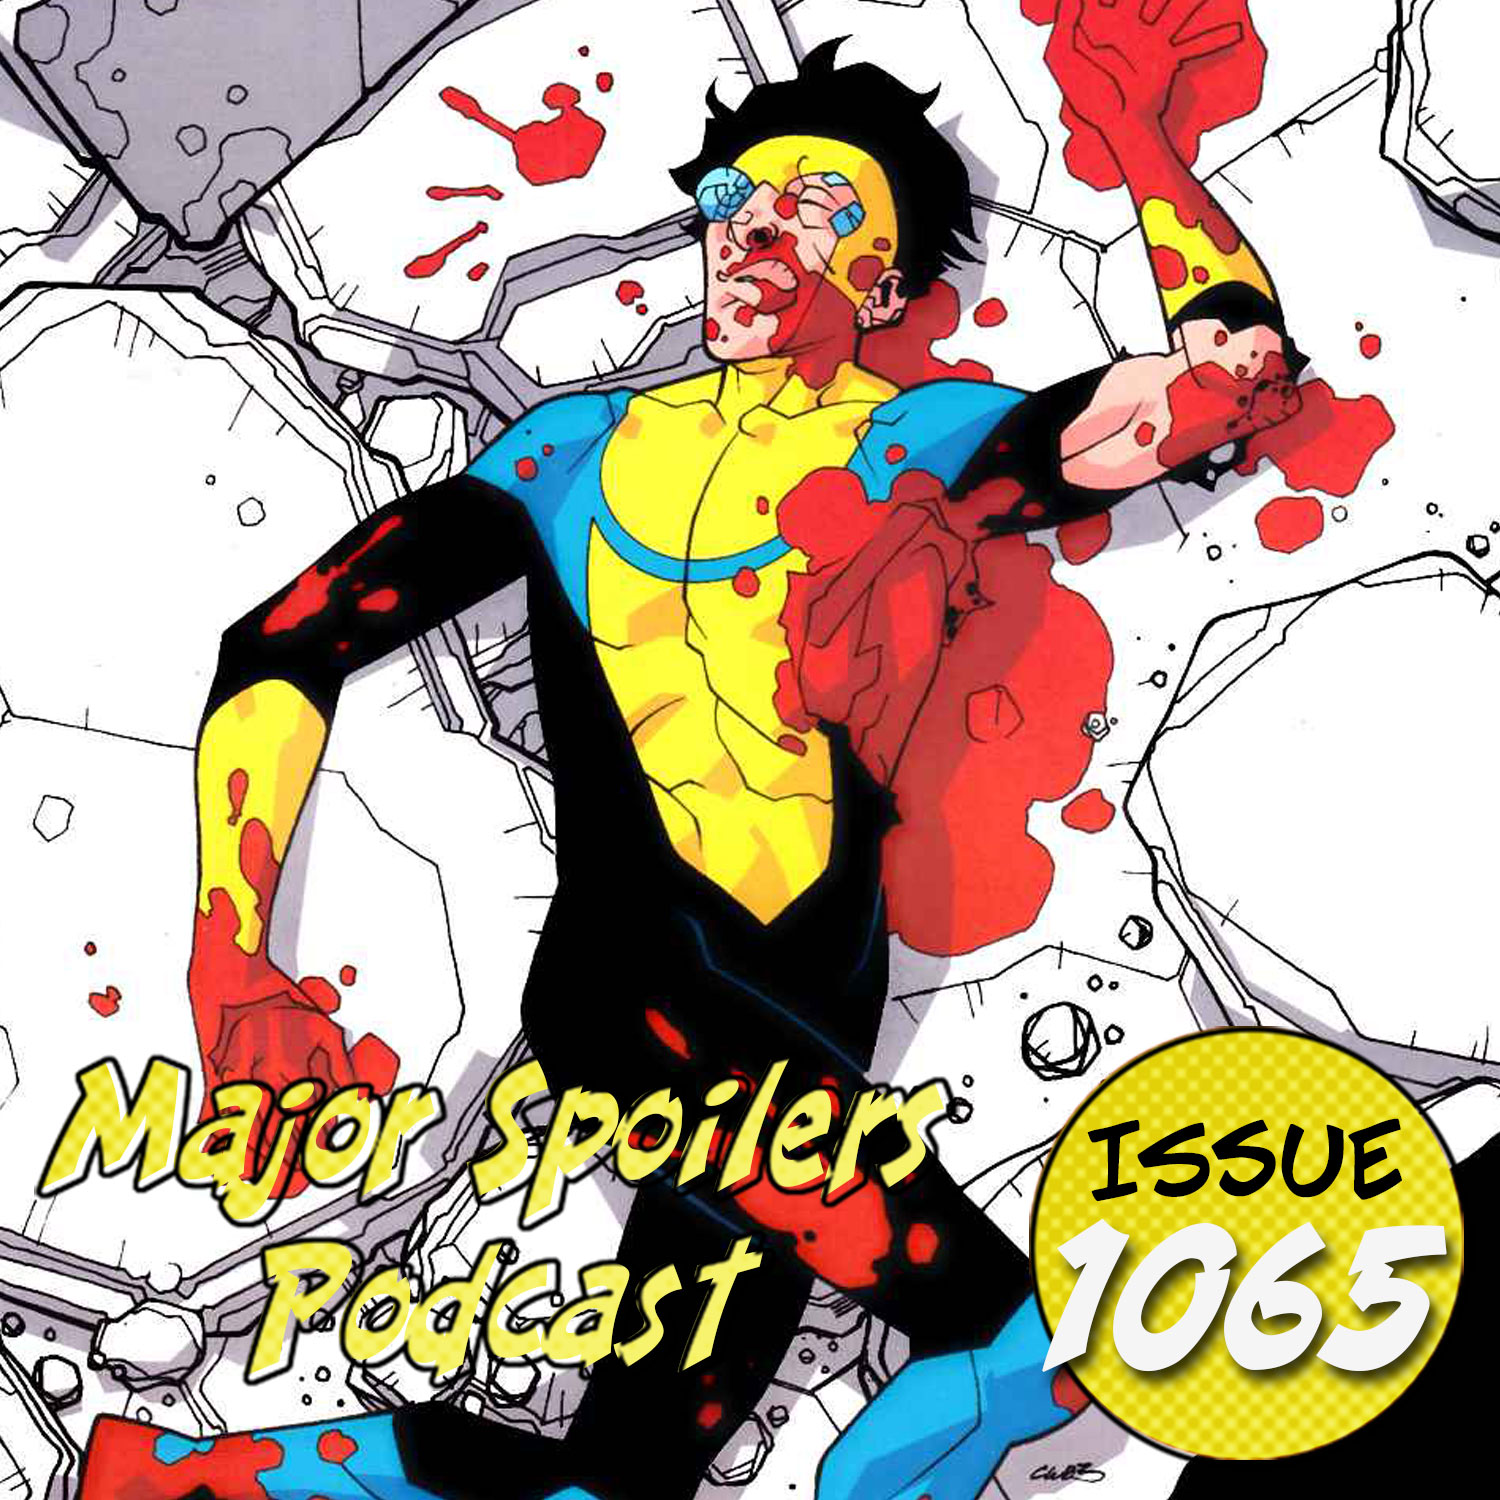 Major Spoilers Podcast #1065: The Invincible Podcast